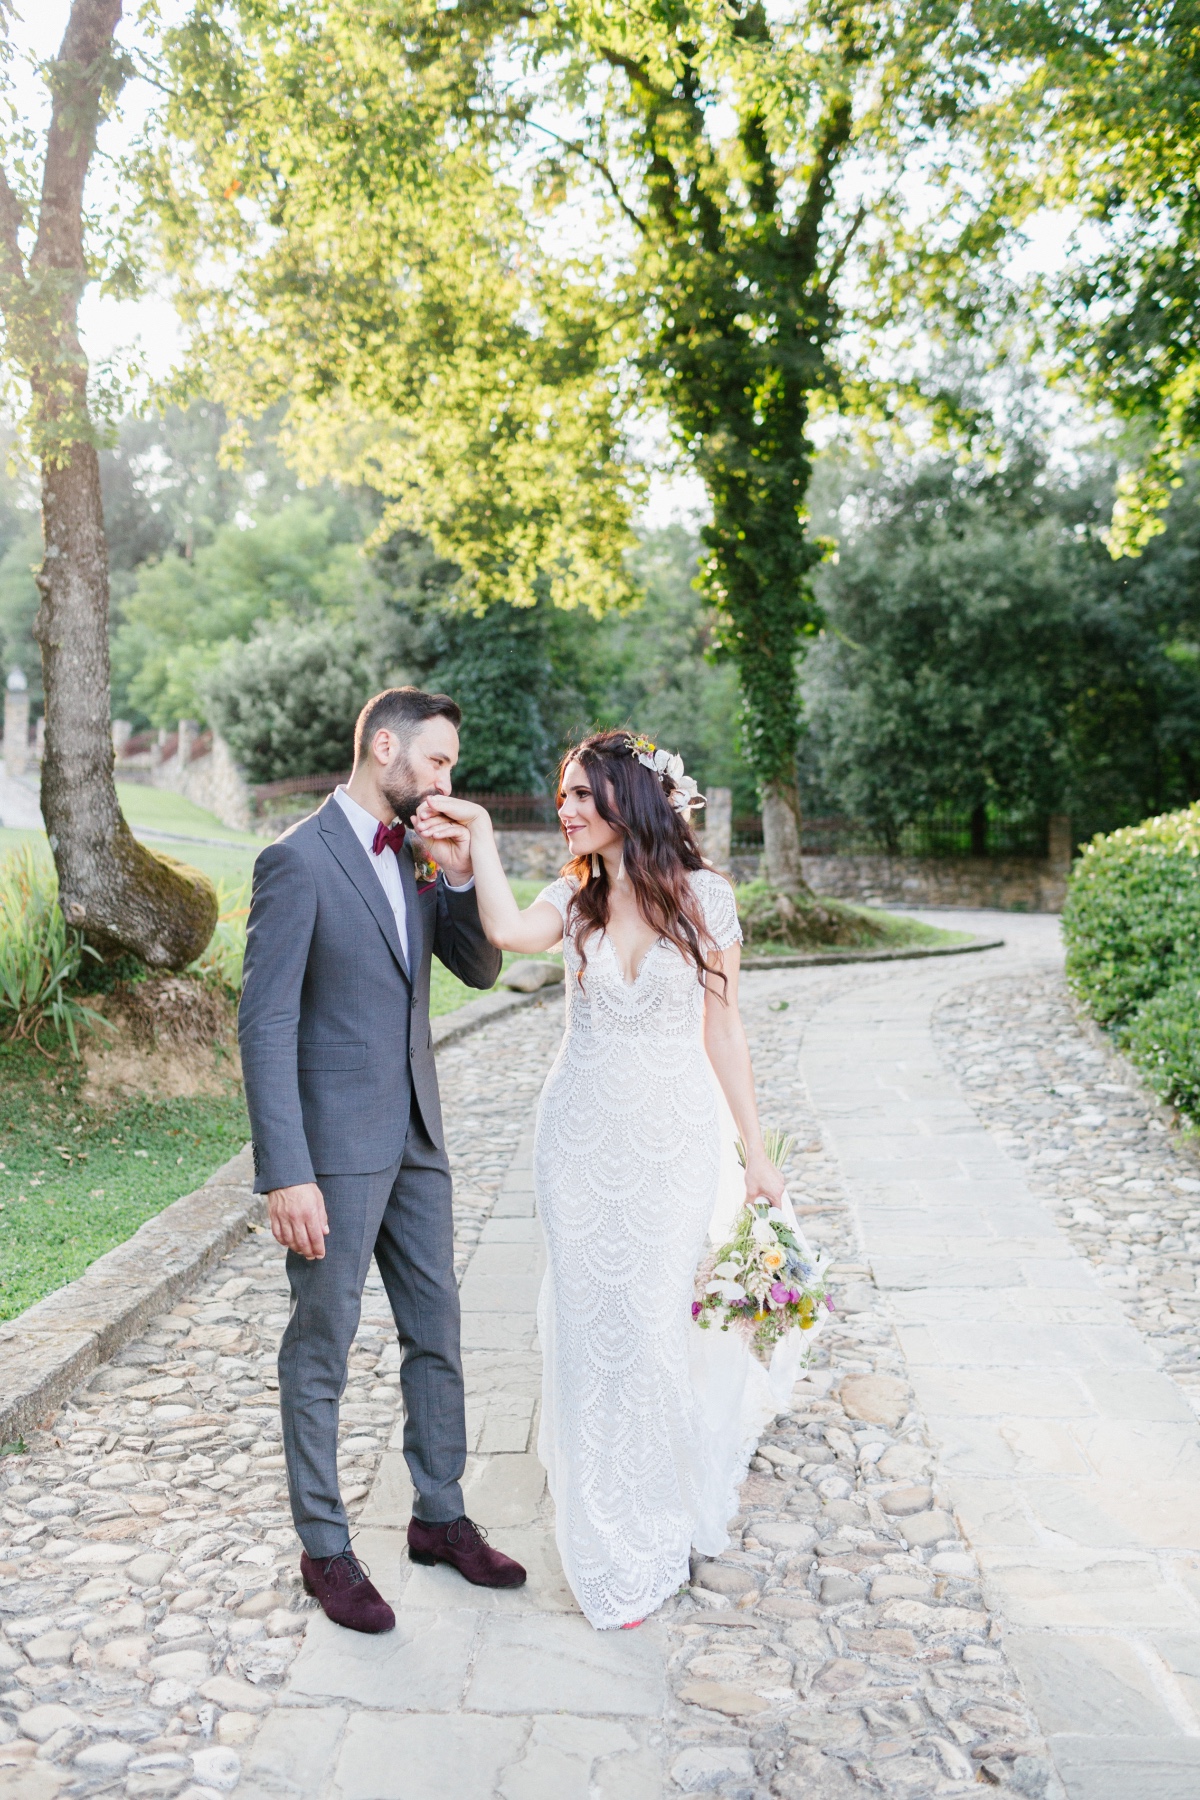 Enchanted Vintage Gipsy-Chic Fairytale in Tuscany